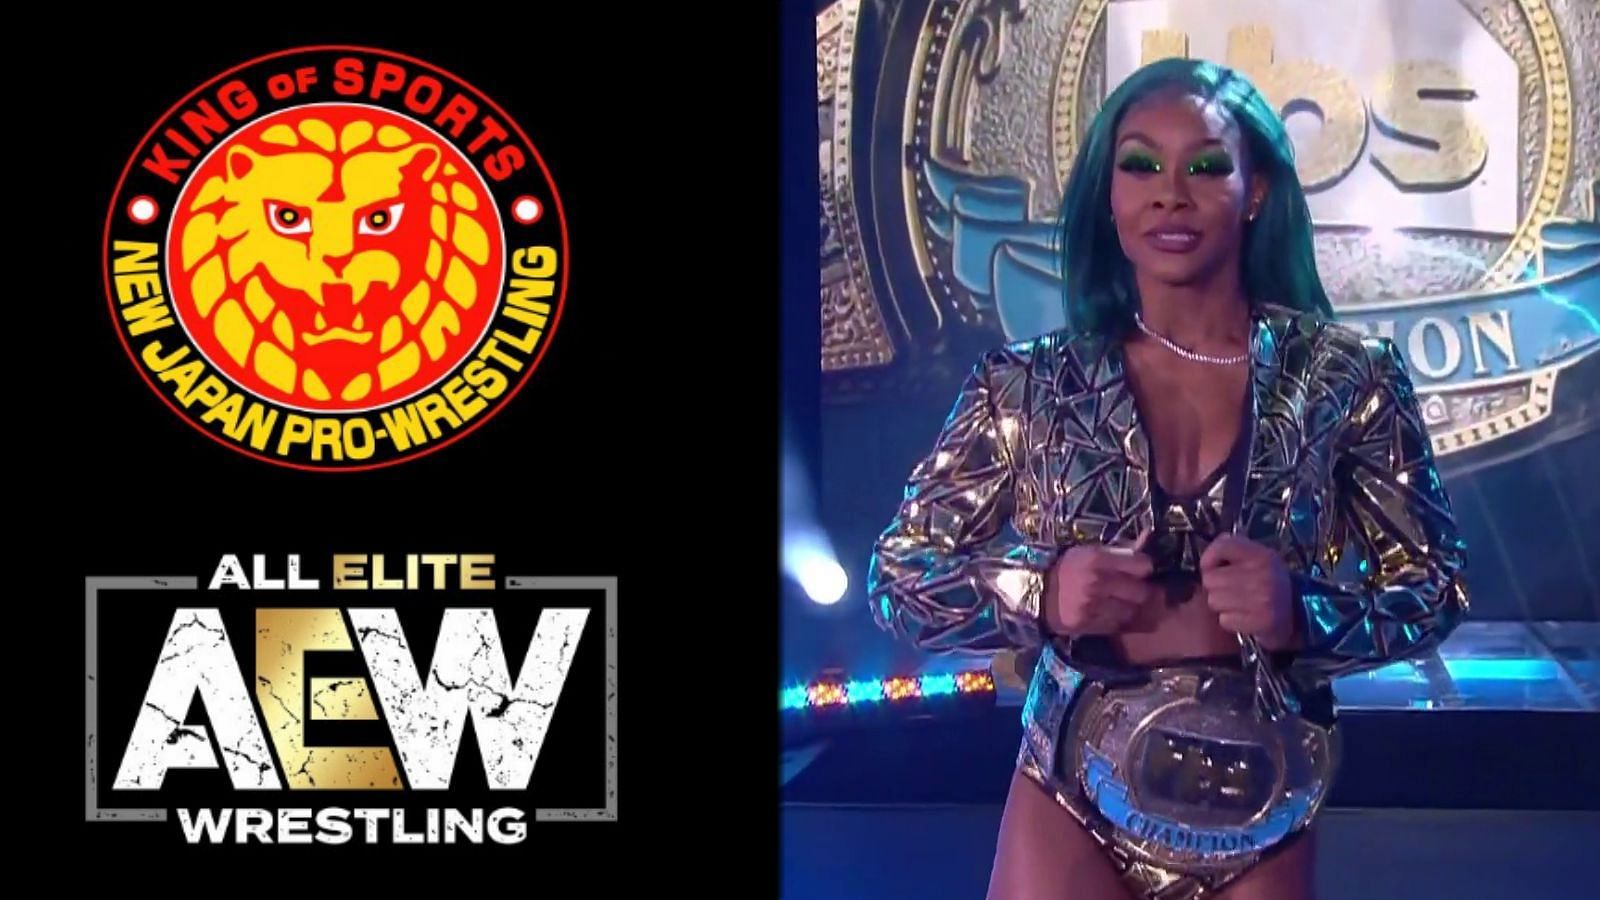 The partnership between NJPW and AEW goes full force, while TBS Champion Jade Cargill faces her toughest opponent yet.